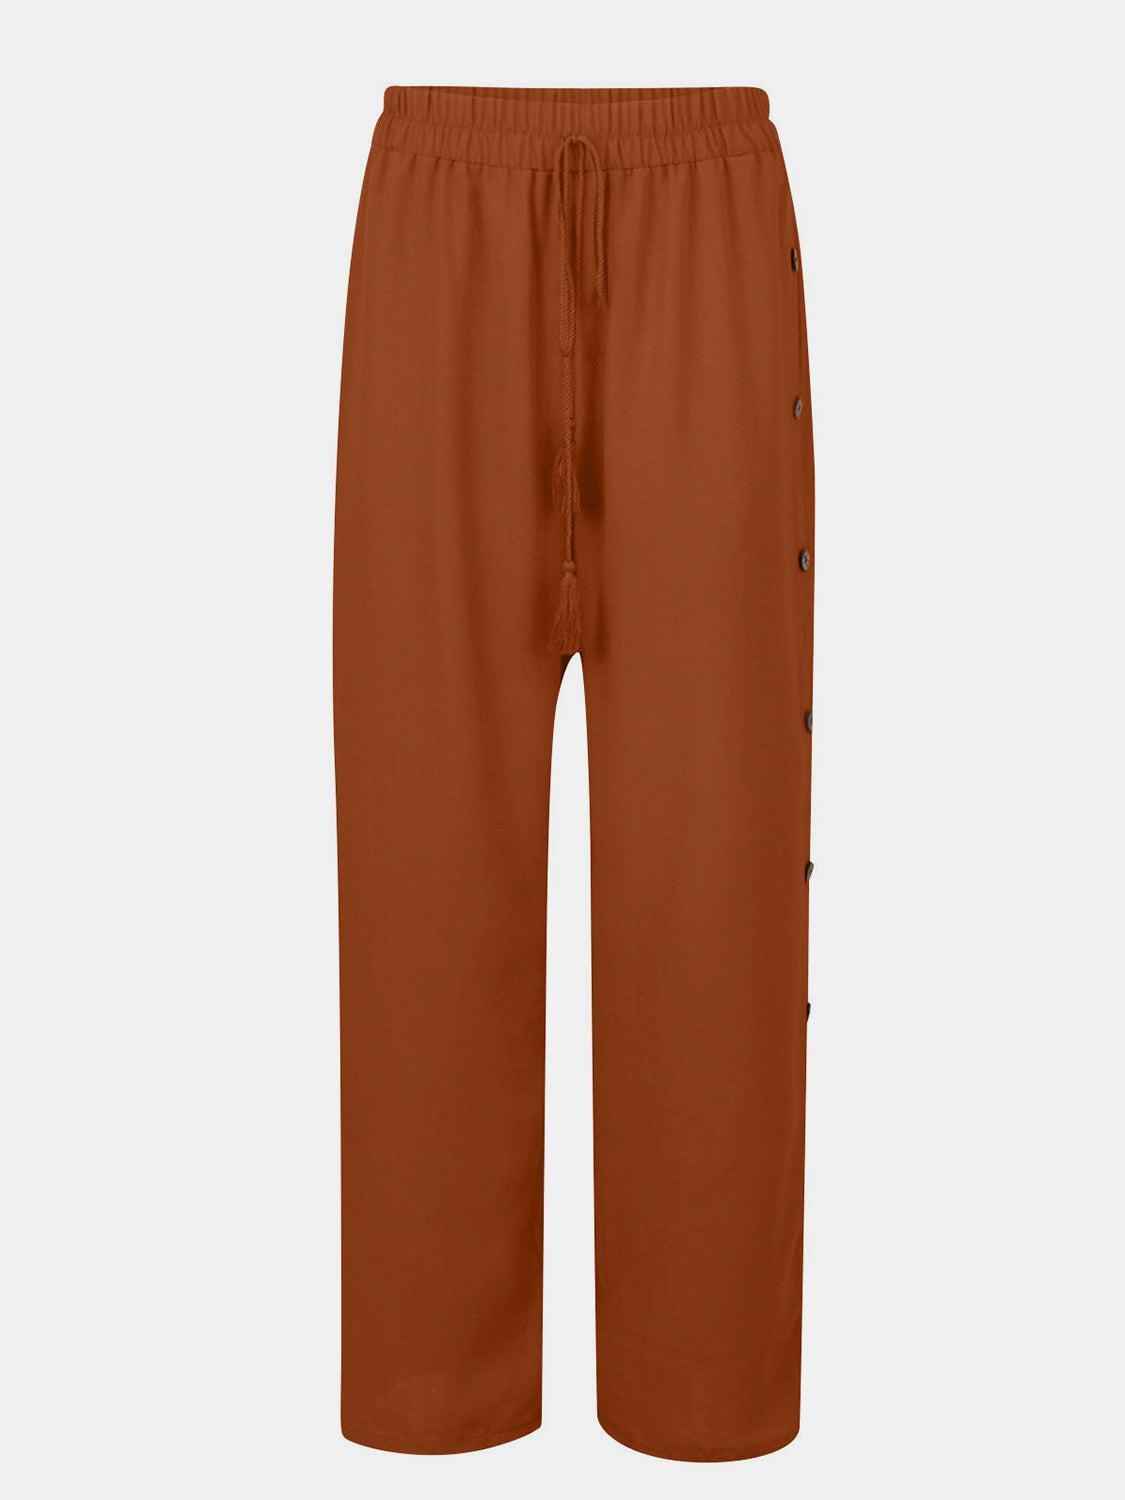 a brown pants with buttons on the side